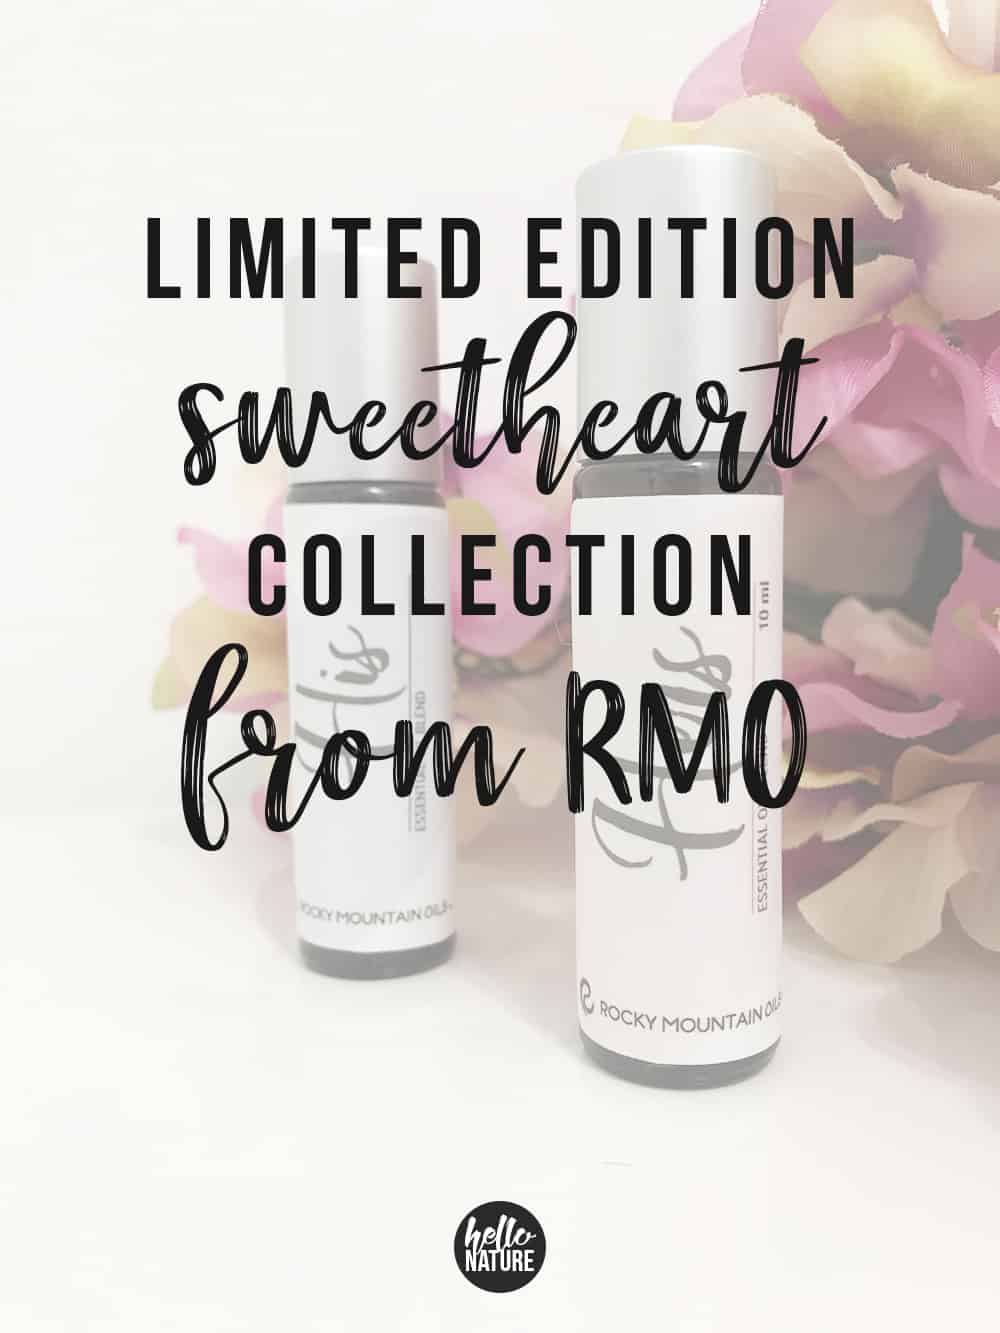 The Limited Edition Sweetheart Collection from Rocky Mountain Oils is a fantastic gift for Valentine's Day! Find out what makes this exclusive collection so sweet. #ValentinesDay #ValentineDayGift #HisAndHers #HisAndHersGift